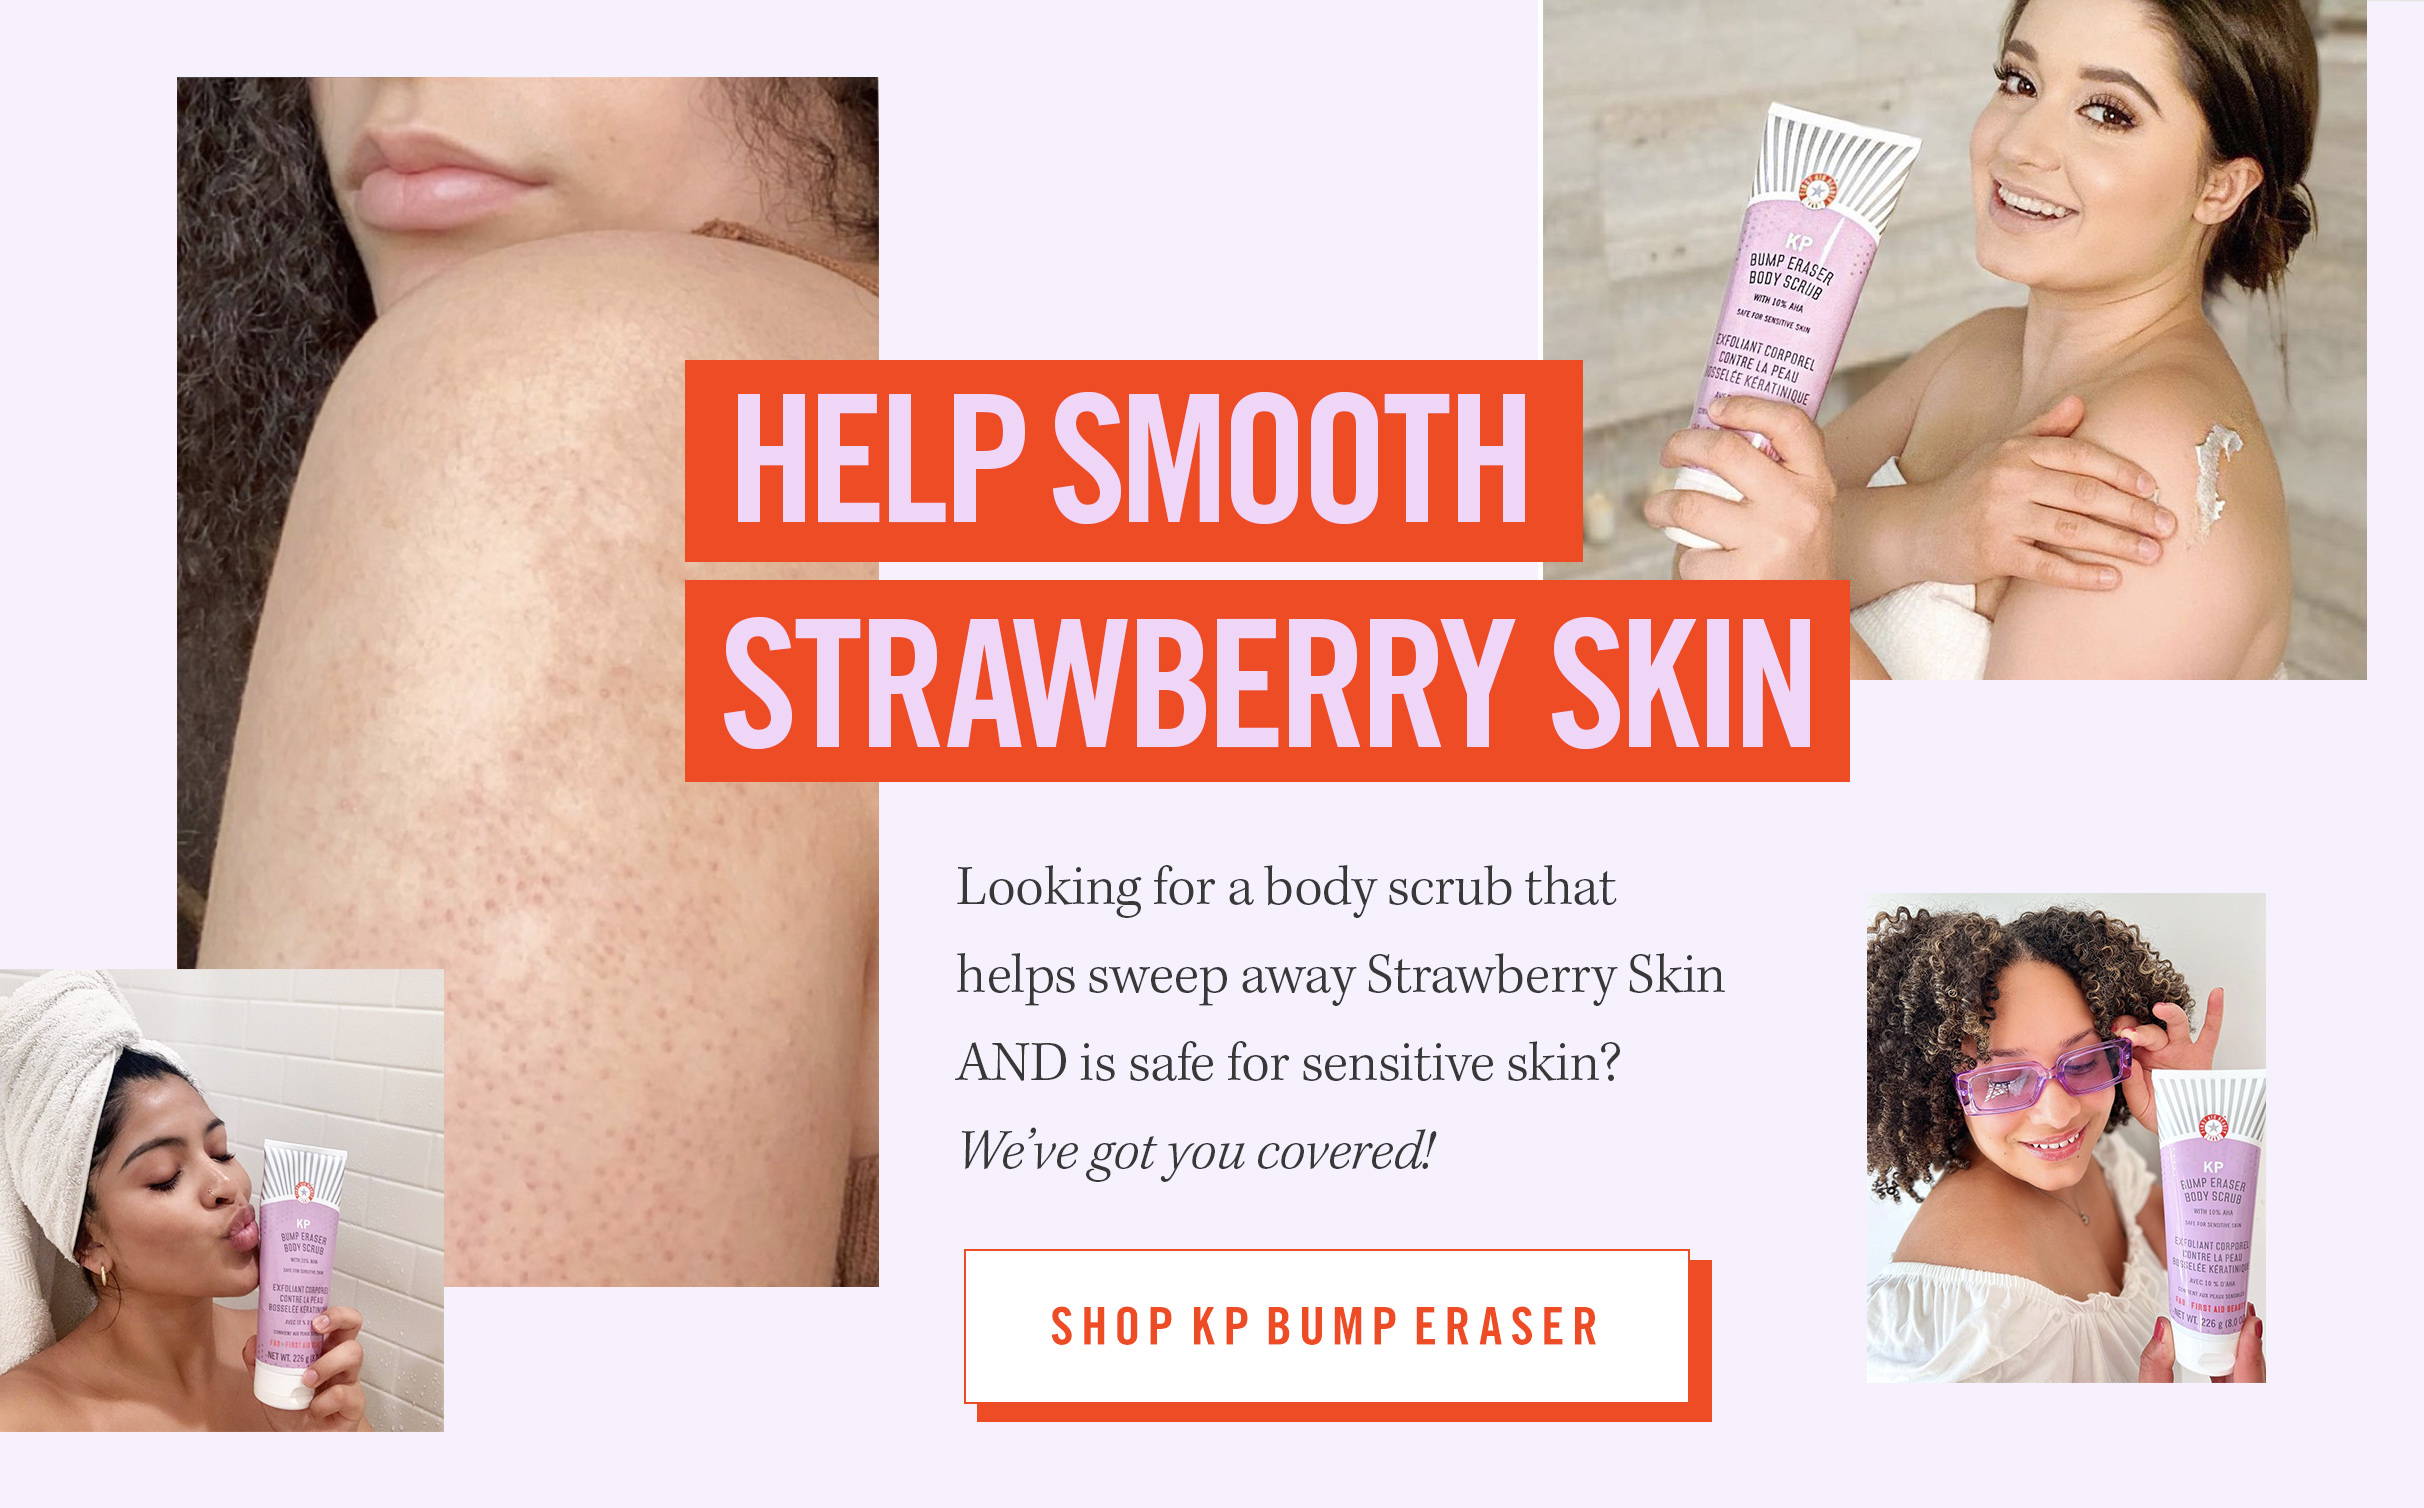 Customers using KP Bump Eraser Scrub. Help smooth strawberry skin. Looking for a body scrub that helps sweep away strawberry skin and is safe for sensitive skin? We've got you covered. Shop KP Bump Eraser